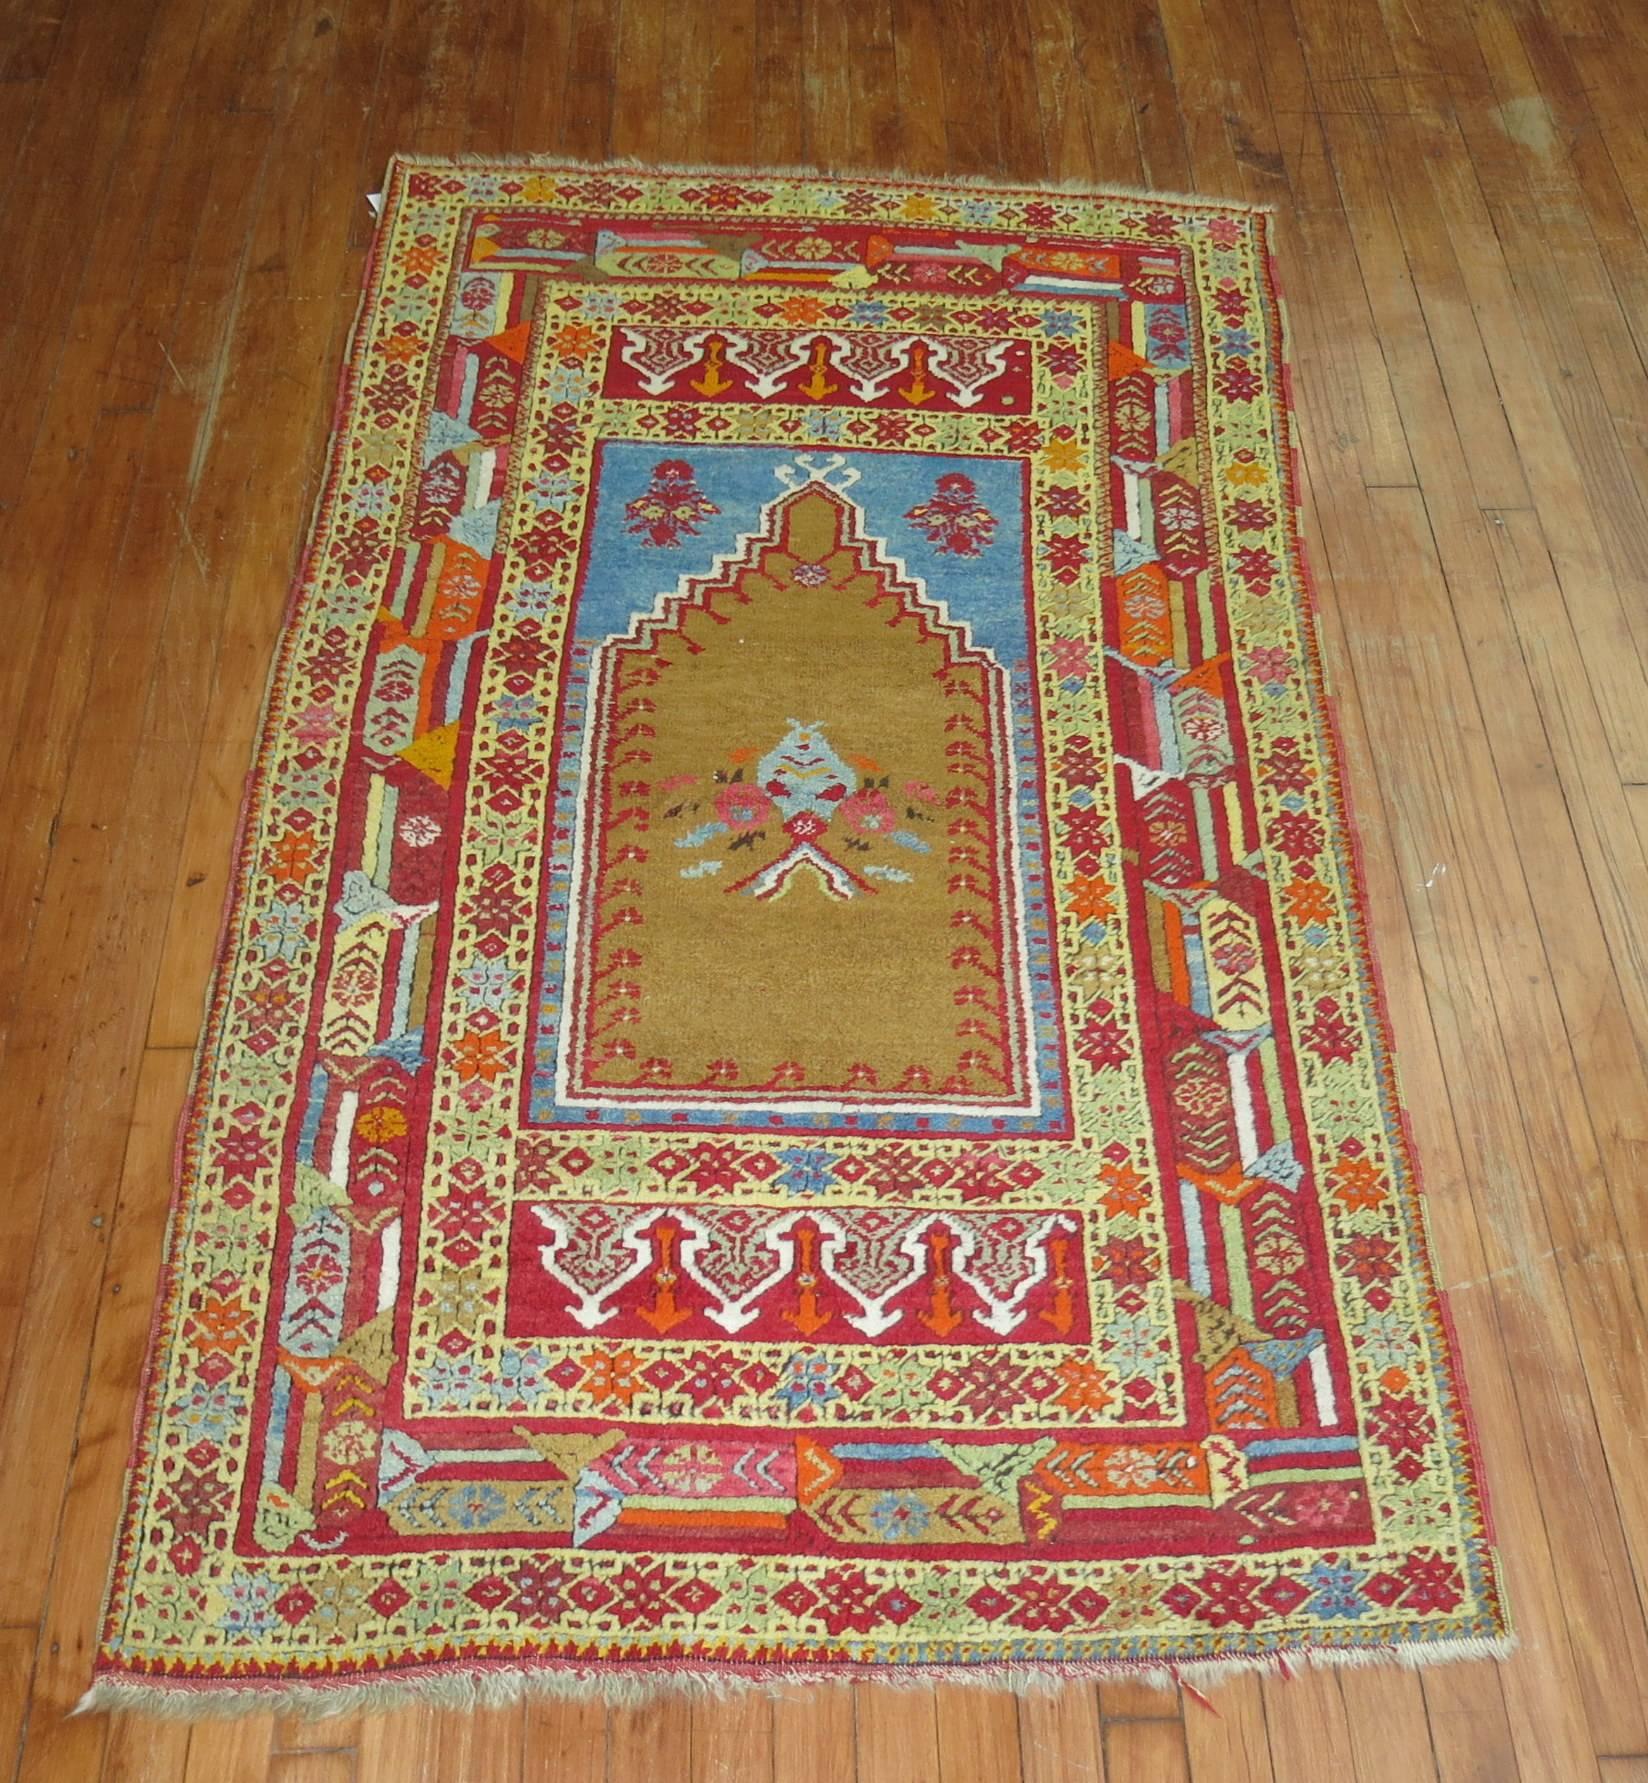 Colorful Directional antique Turkish Prayer rug. The multi-dimensional border on this piece is quite fascinating . We also love the French blue accent we don't typically find in rugs from this region. Would make a great wall piece too.